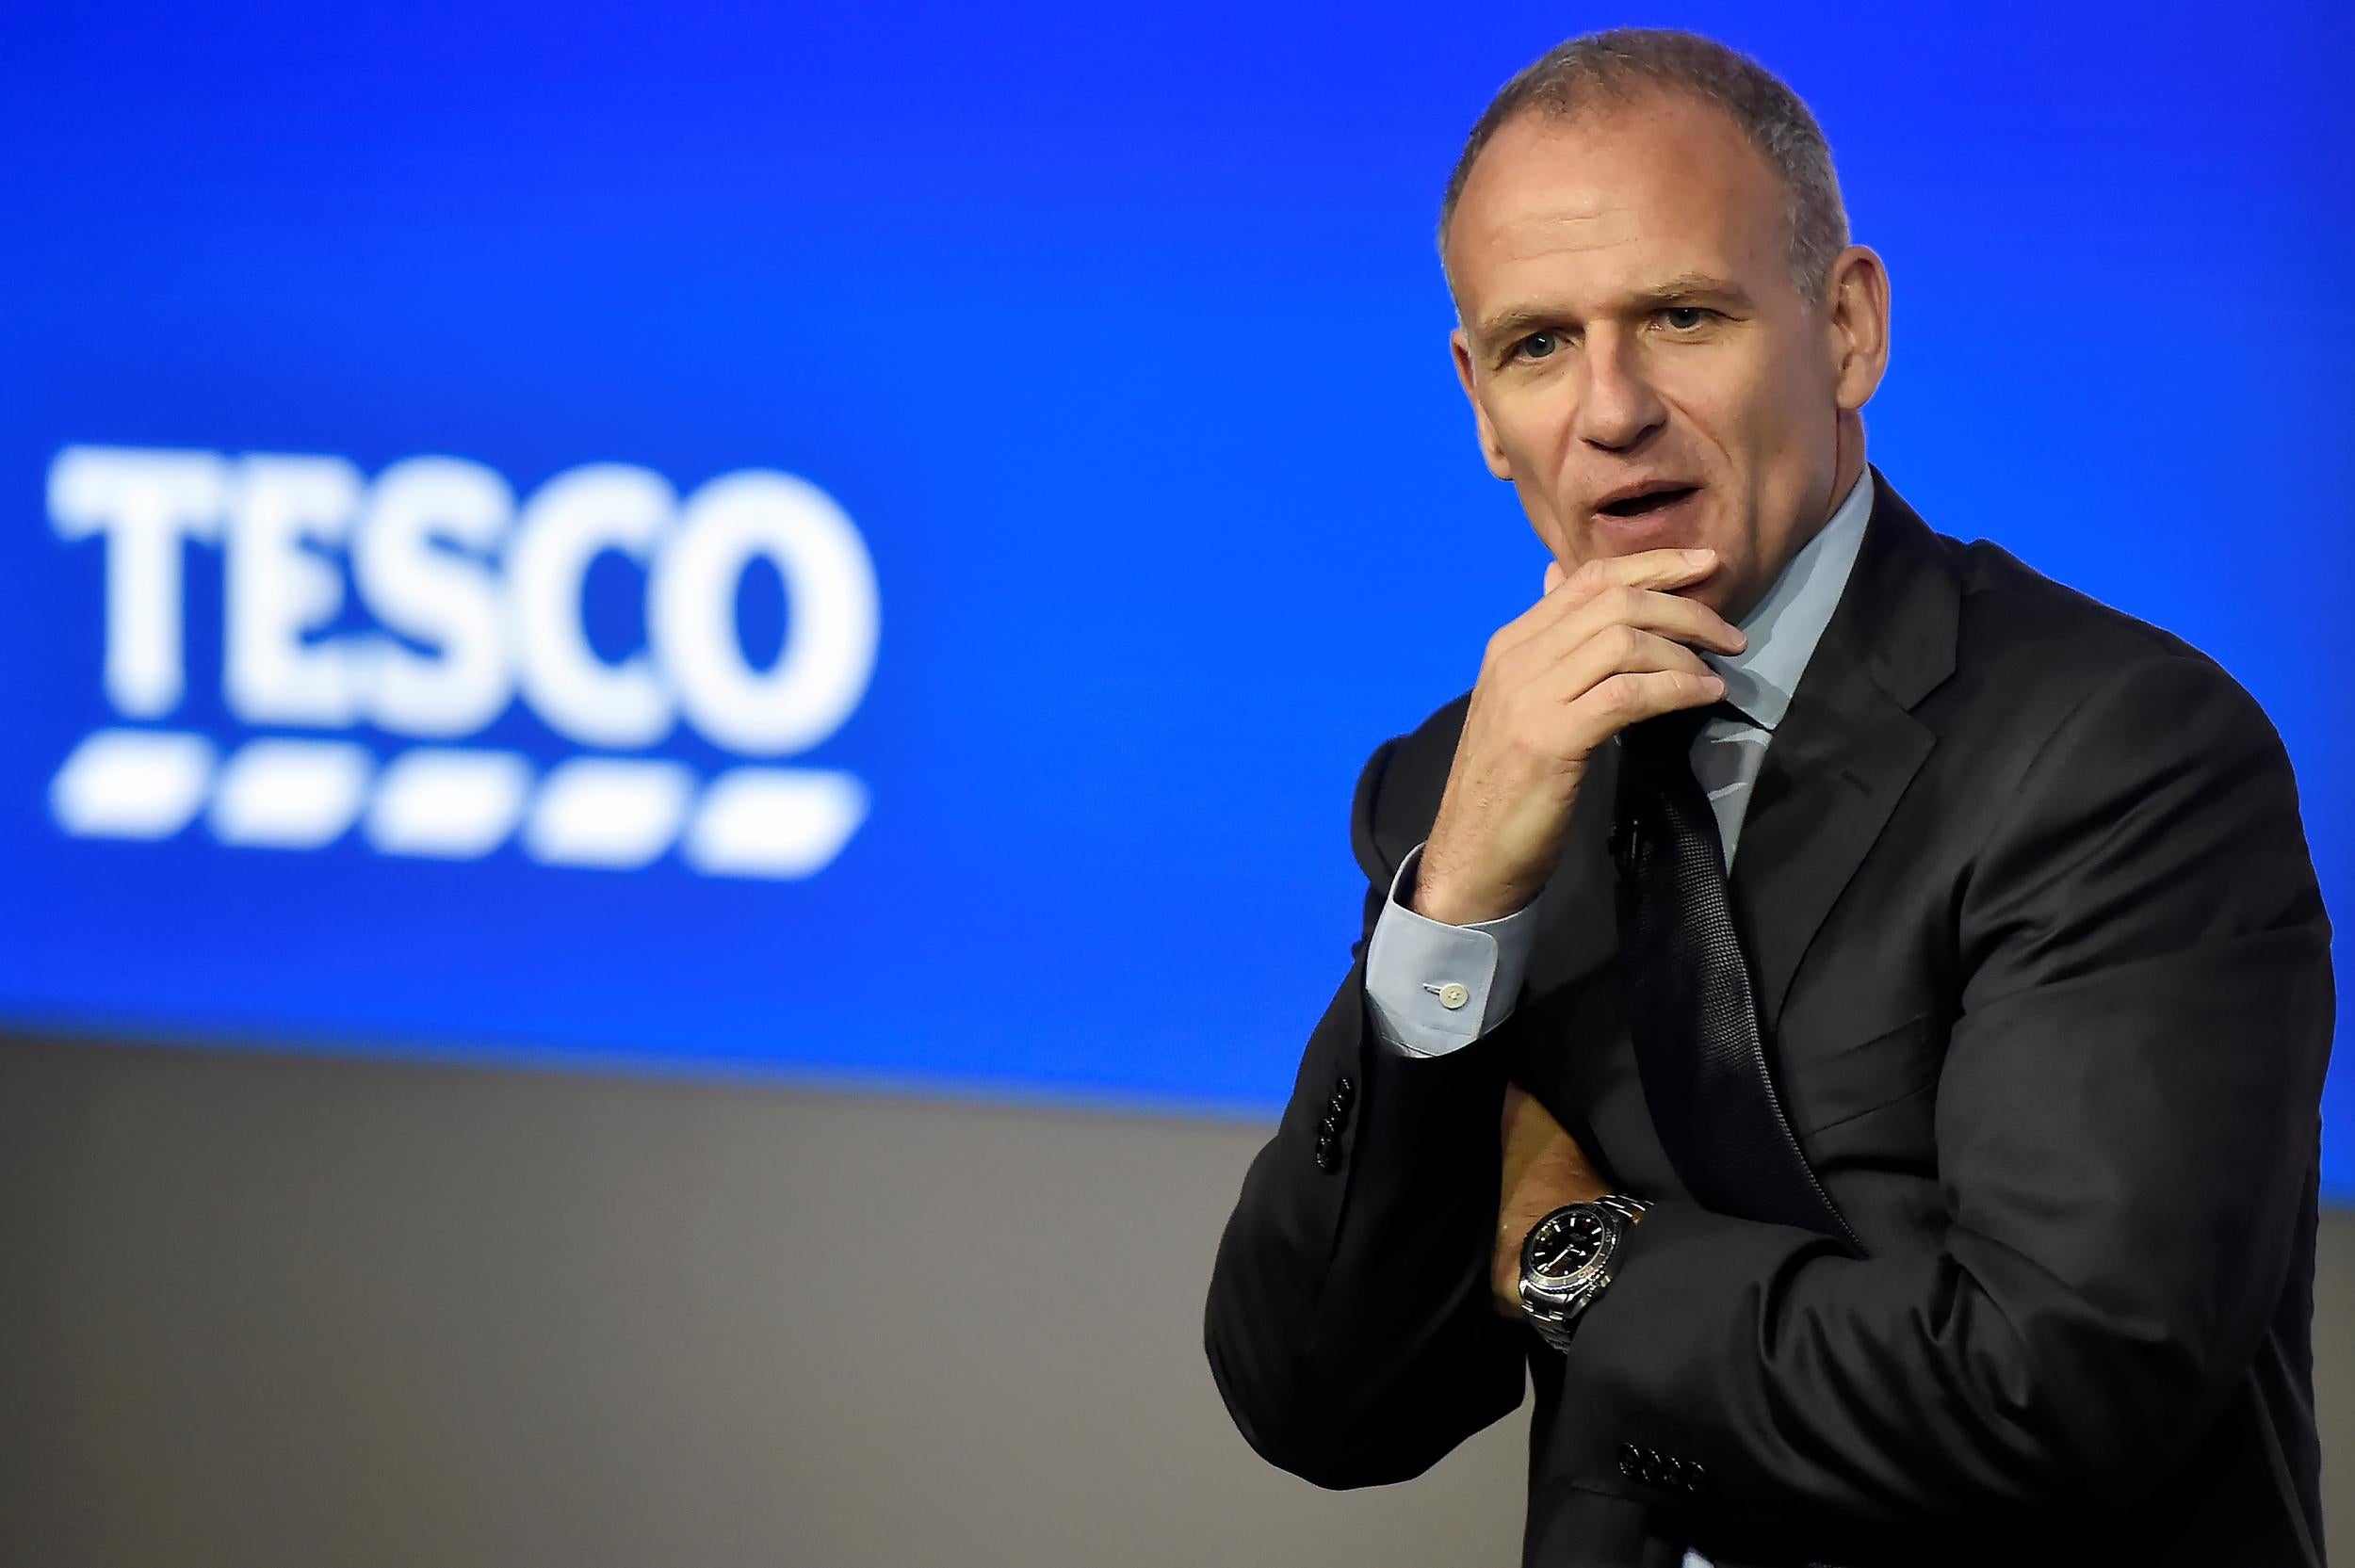 Is Tesco boss David Lewis pondering the launch of a discounter to take on Aldi and Lidl?